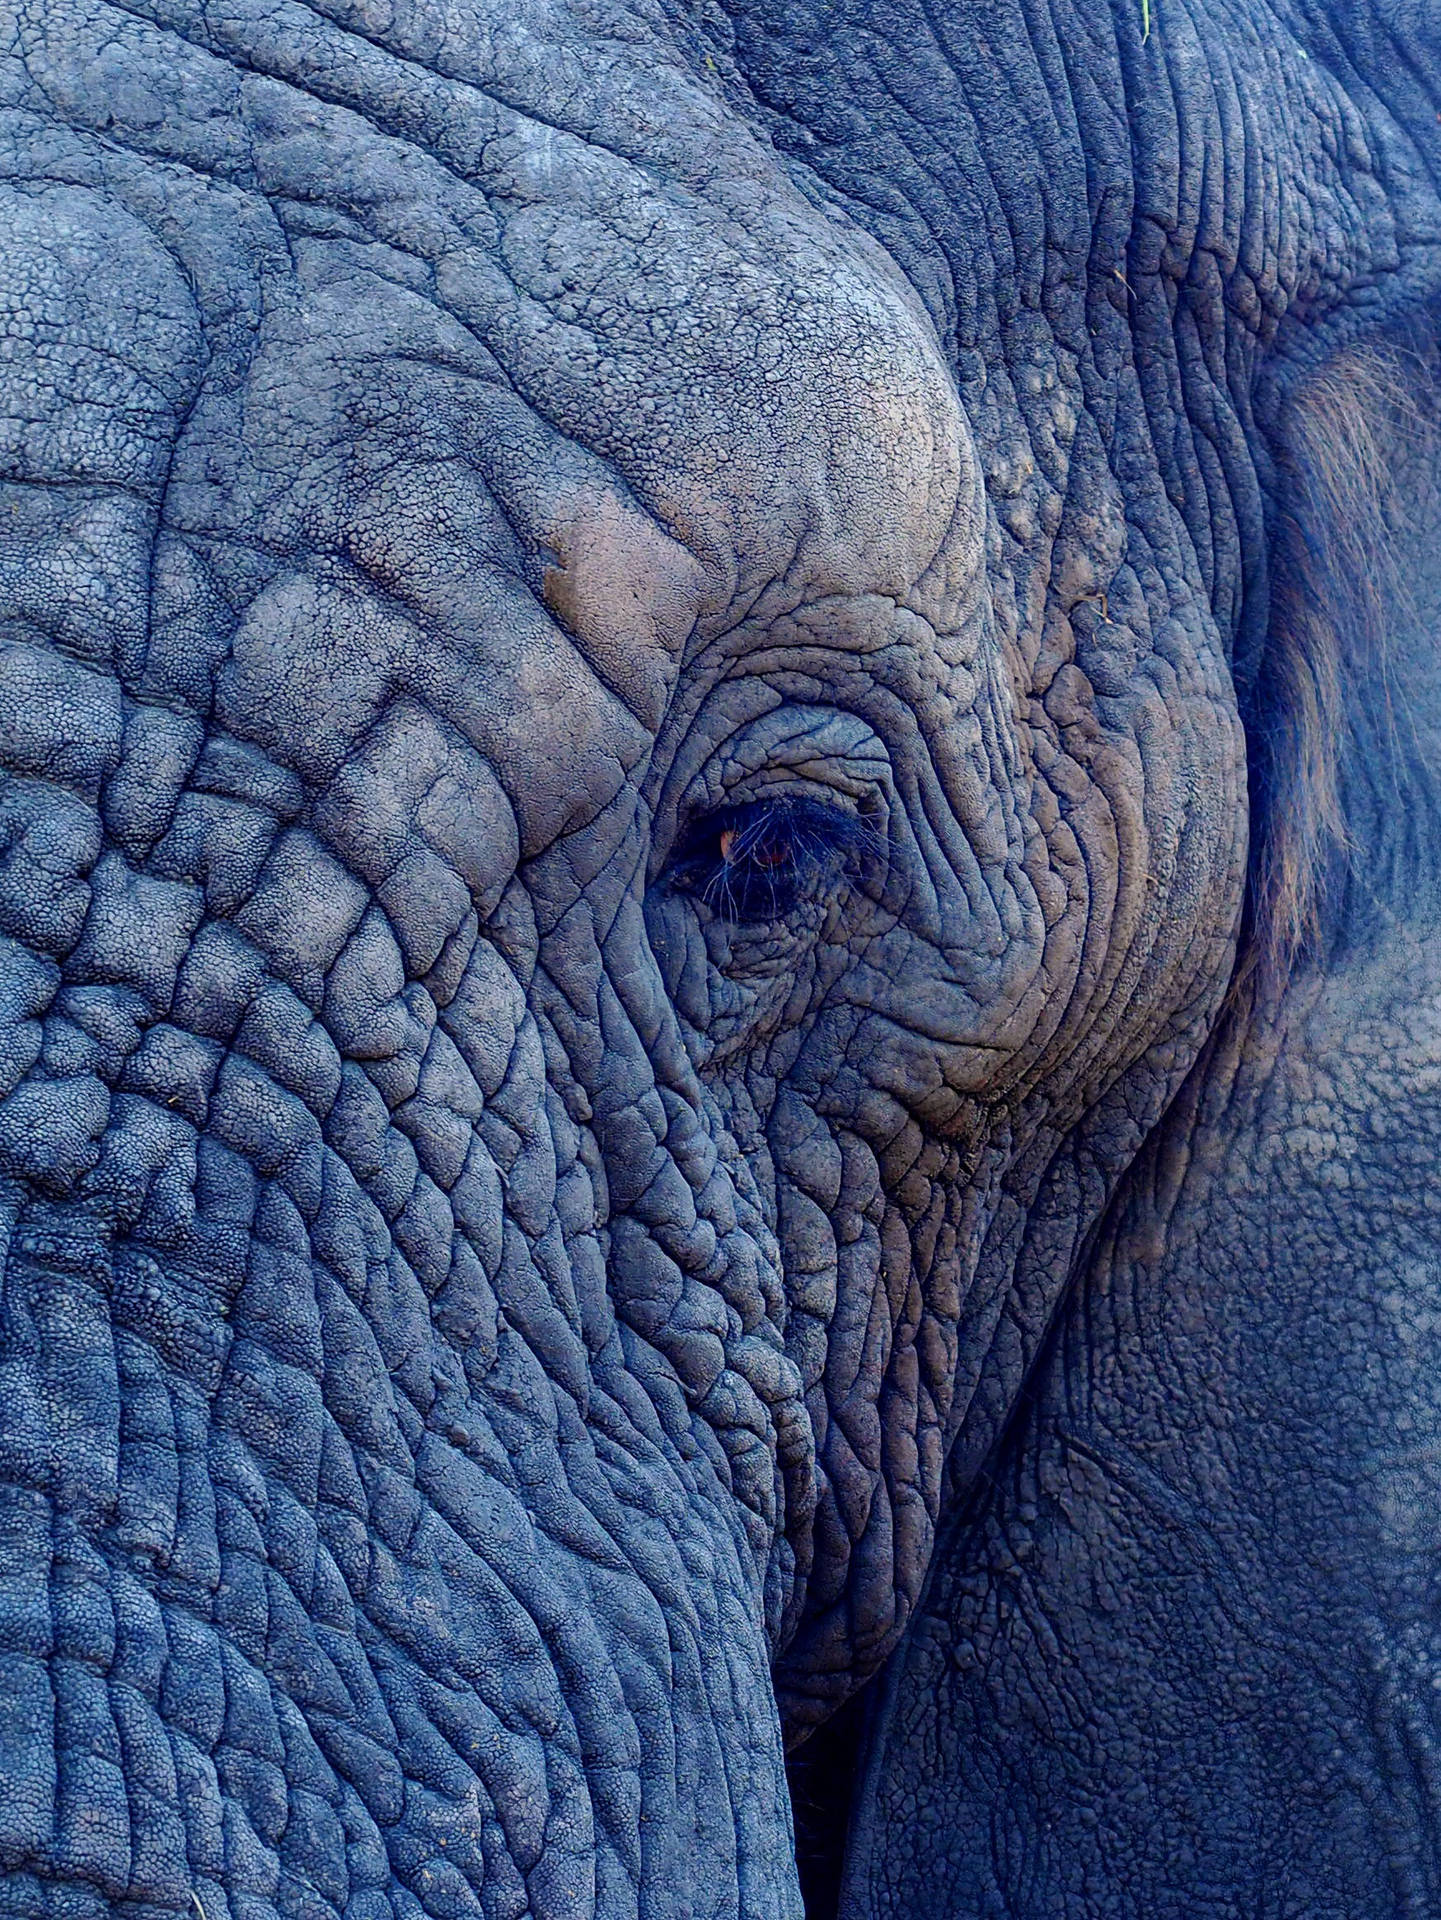 Elephant 1747X2328 Wallpaper and Background Image